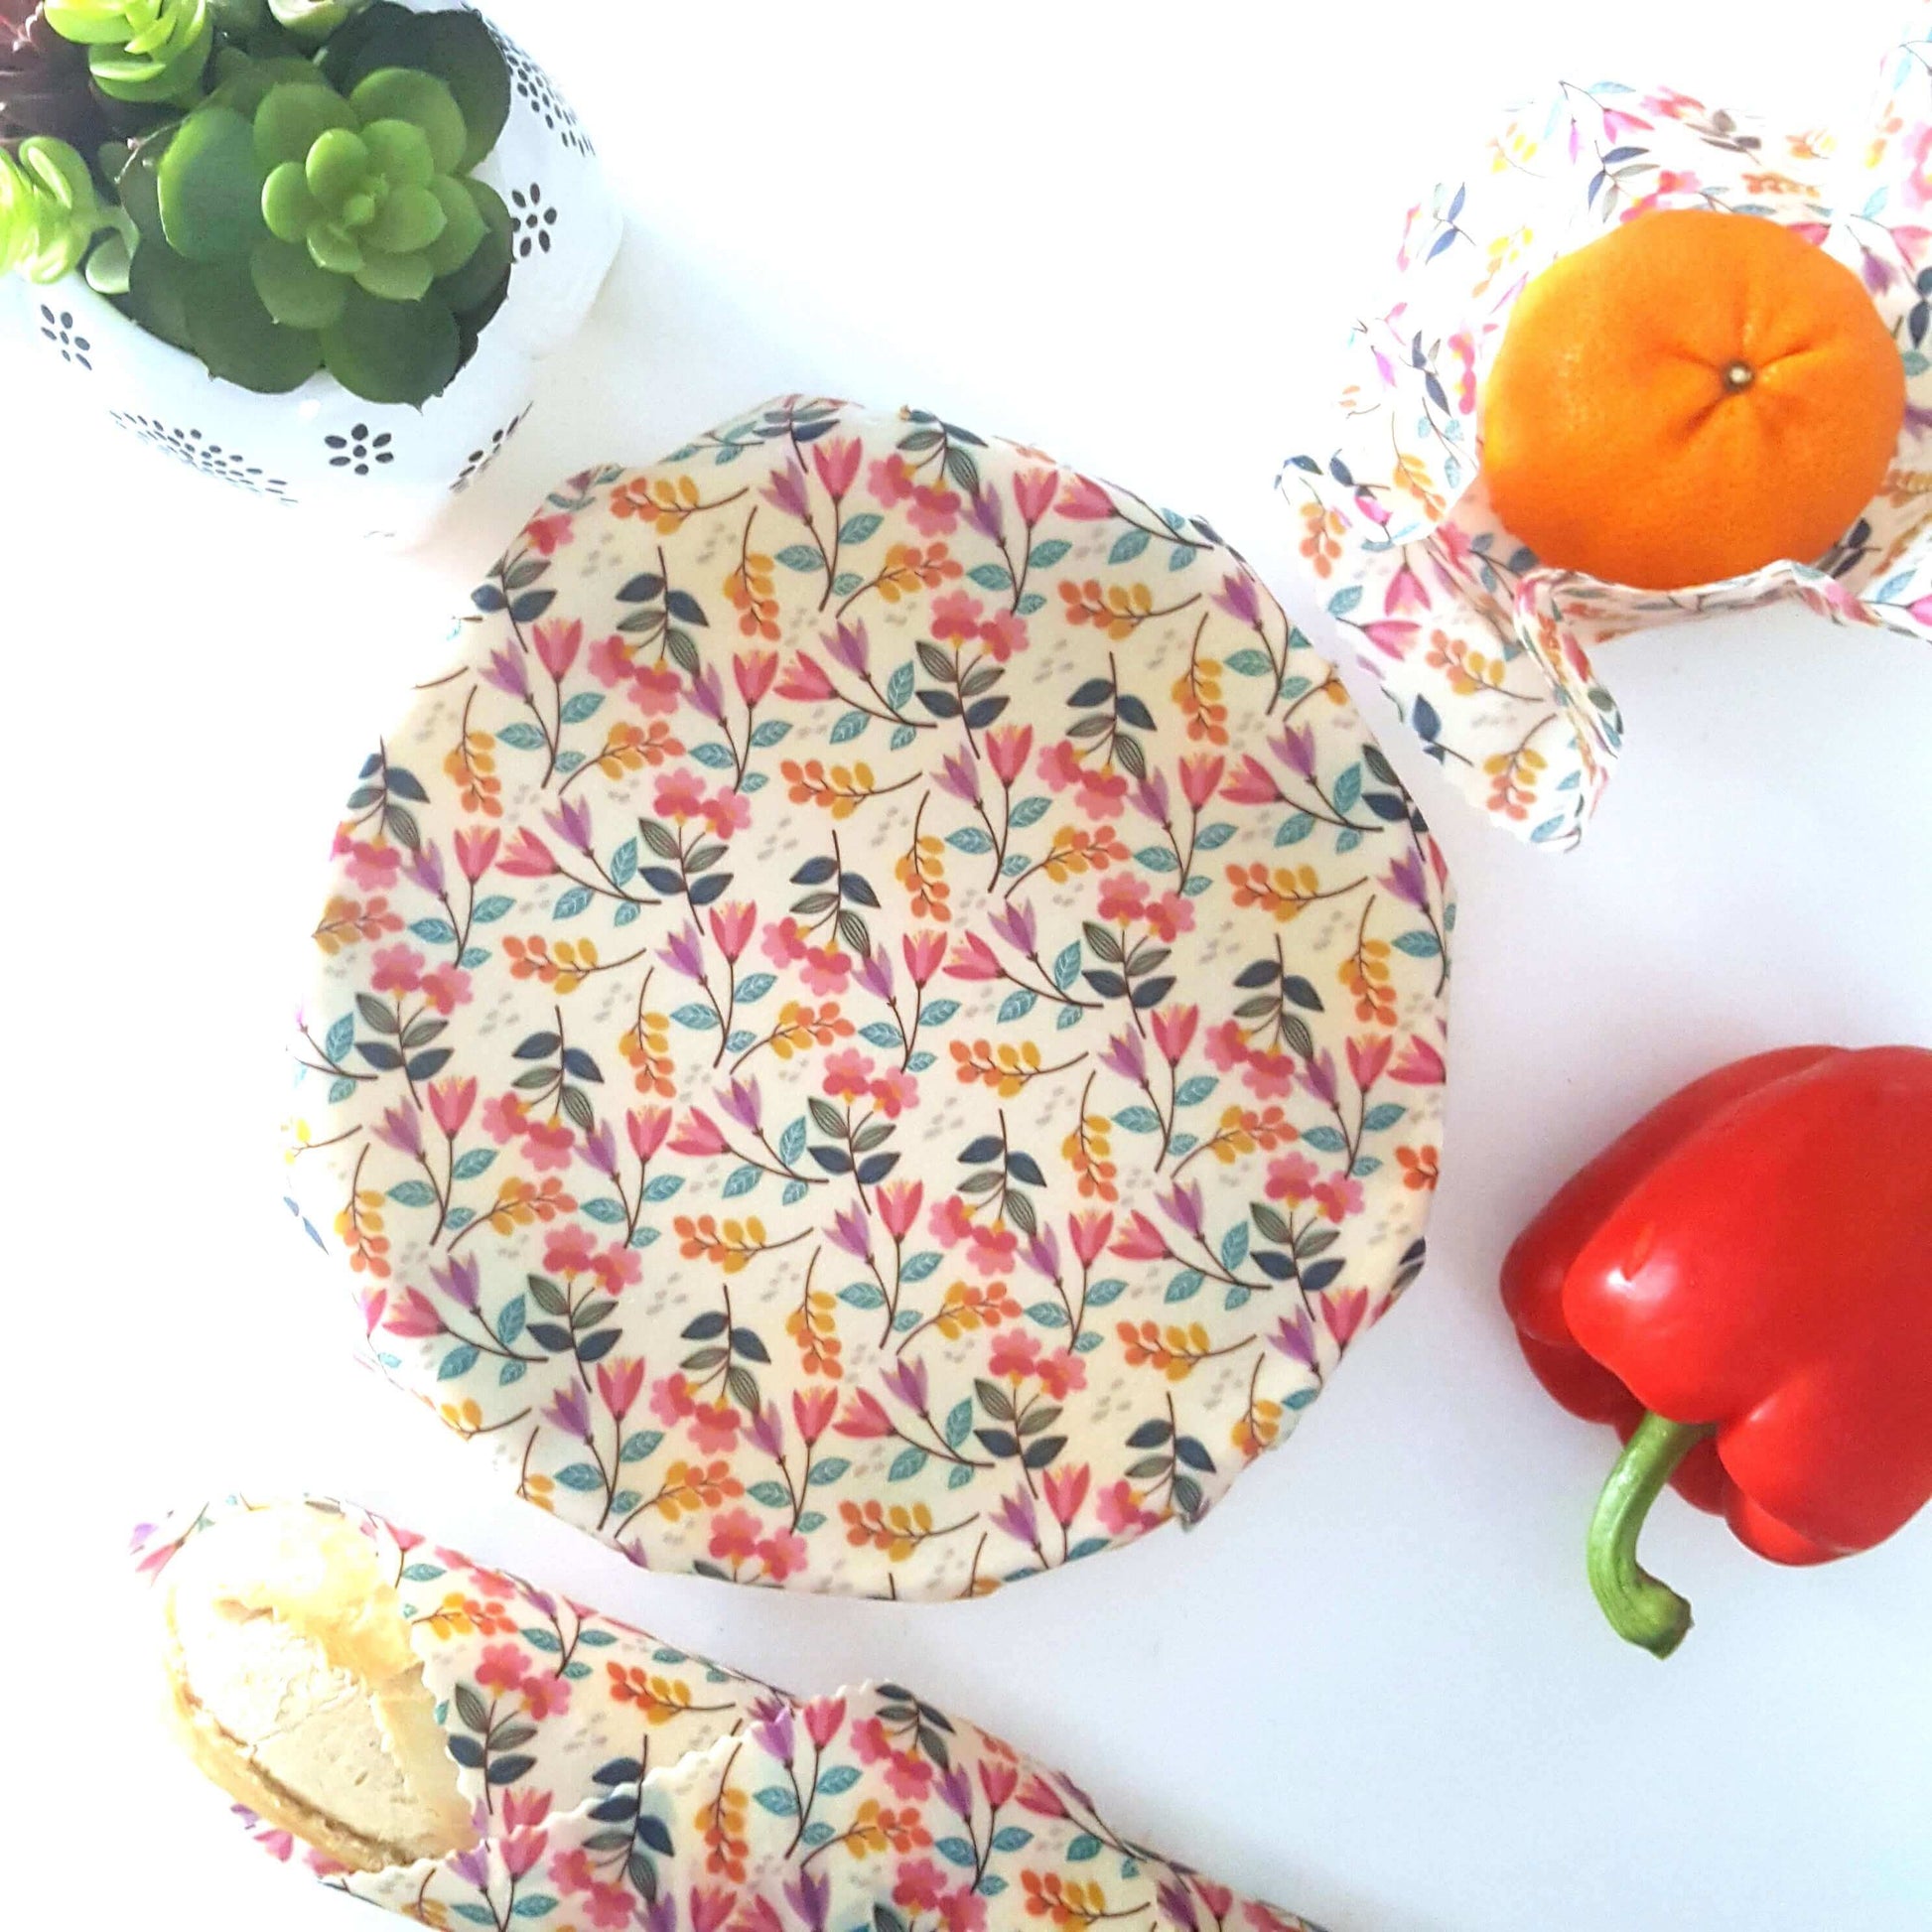 Reusable Beeswax Food Wraps 100% Hand Made in the UK by Honey Bee Good shown in Classic Set of 3 Meadow flatlay